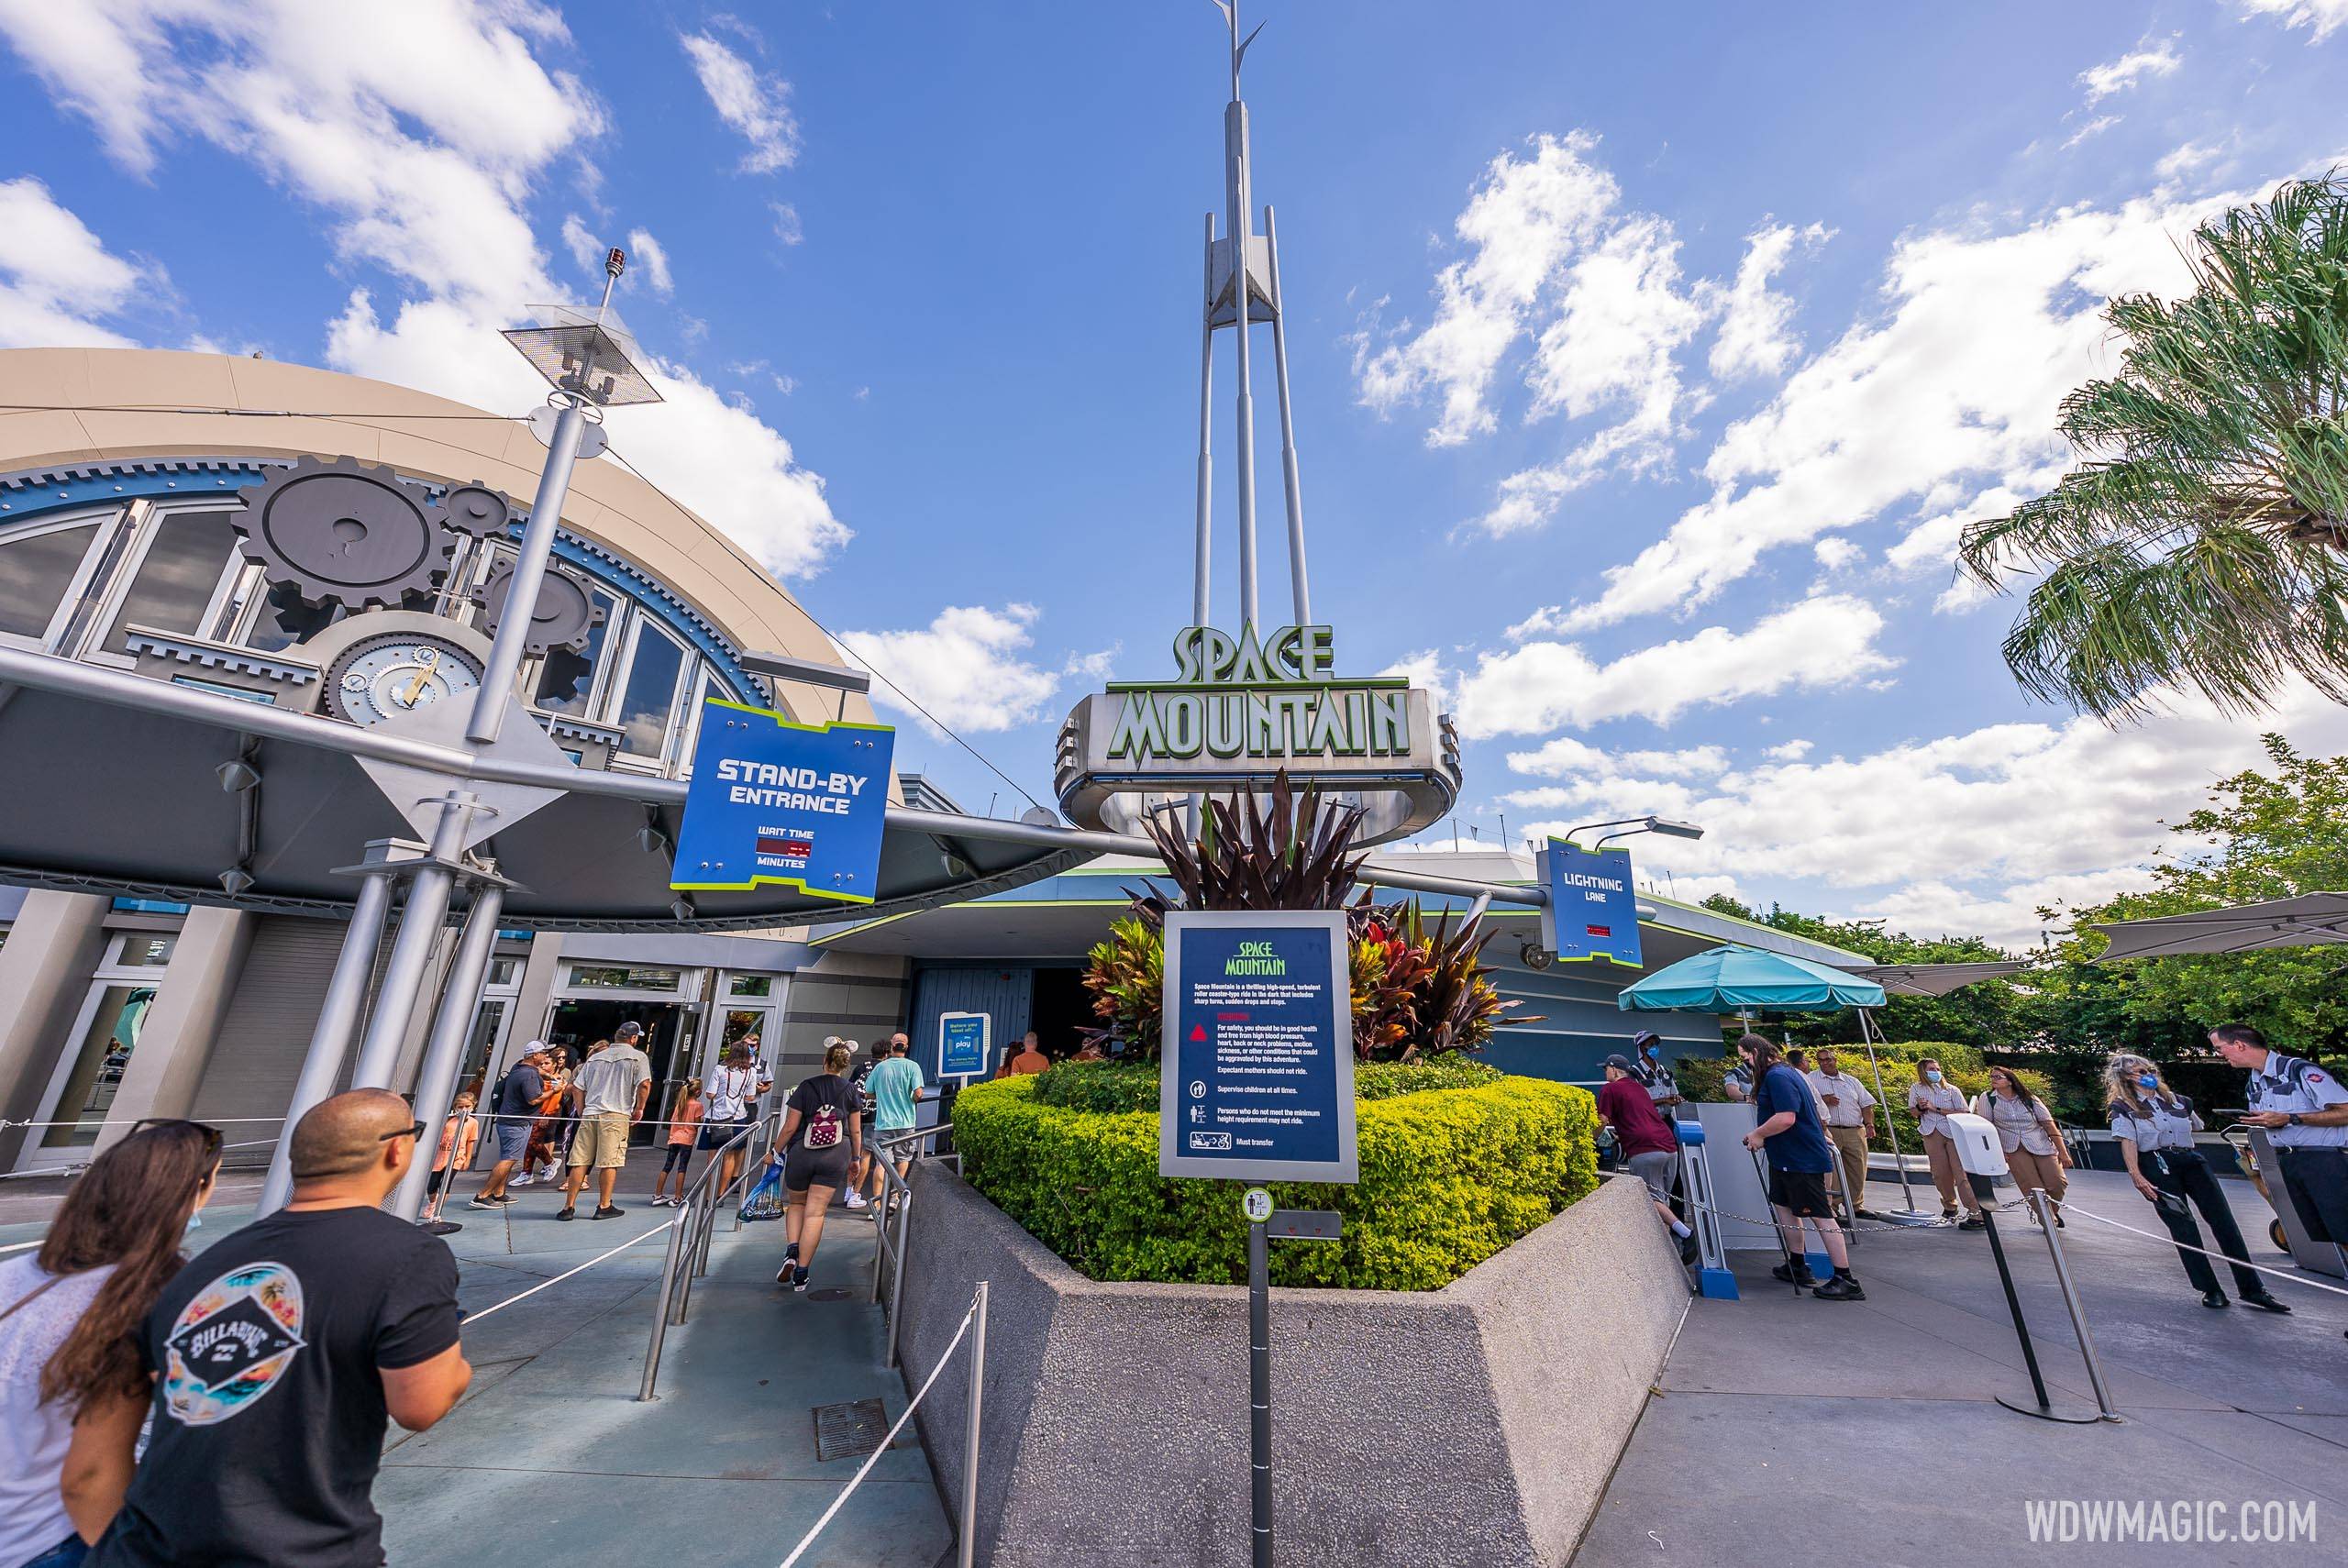 Space Mountain moves back to an individual Lightning Lane purchase